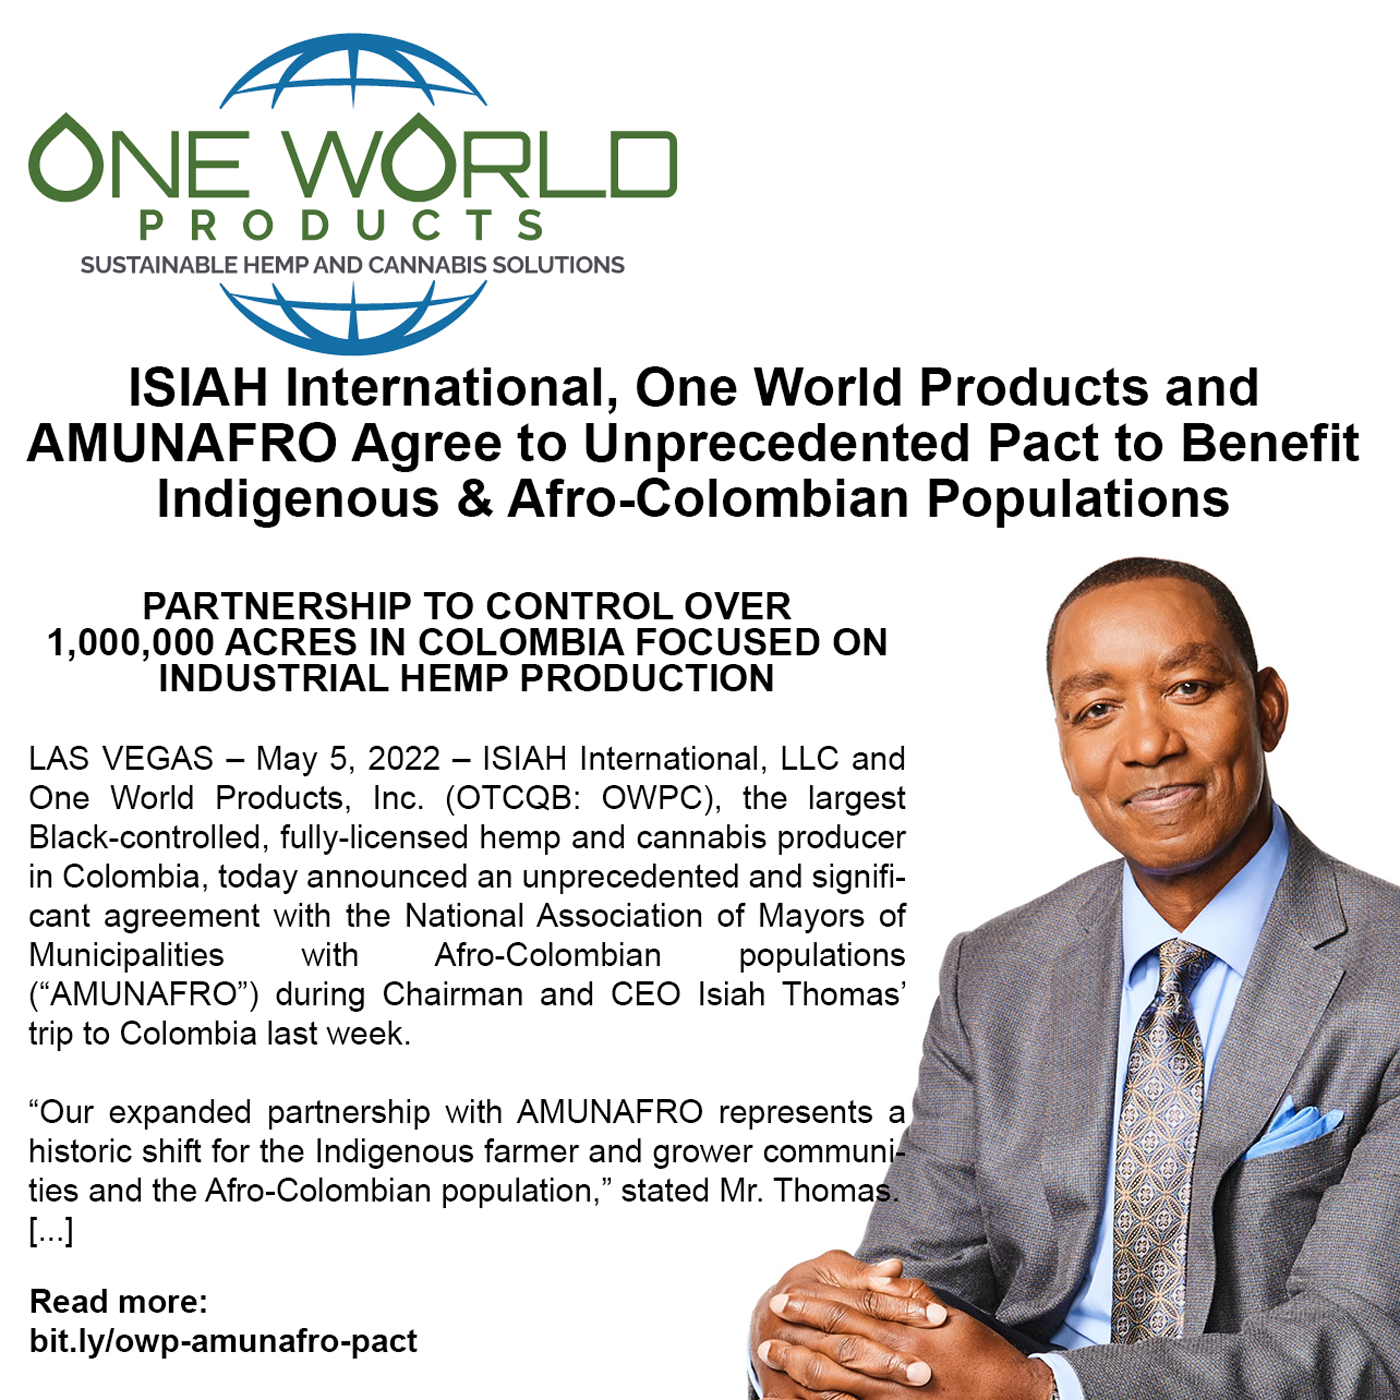 ISIAH International, One World Products and AMUNAFRO Agree to Unprecedented Pact to Benefit Indigenous & Afro-Colombian Populations